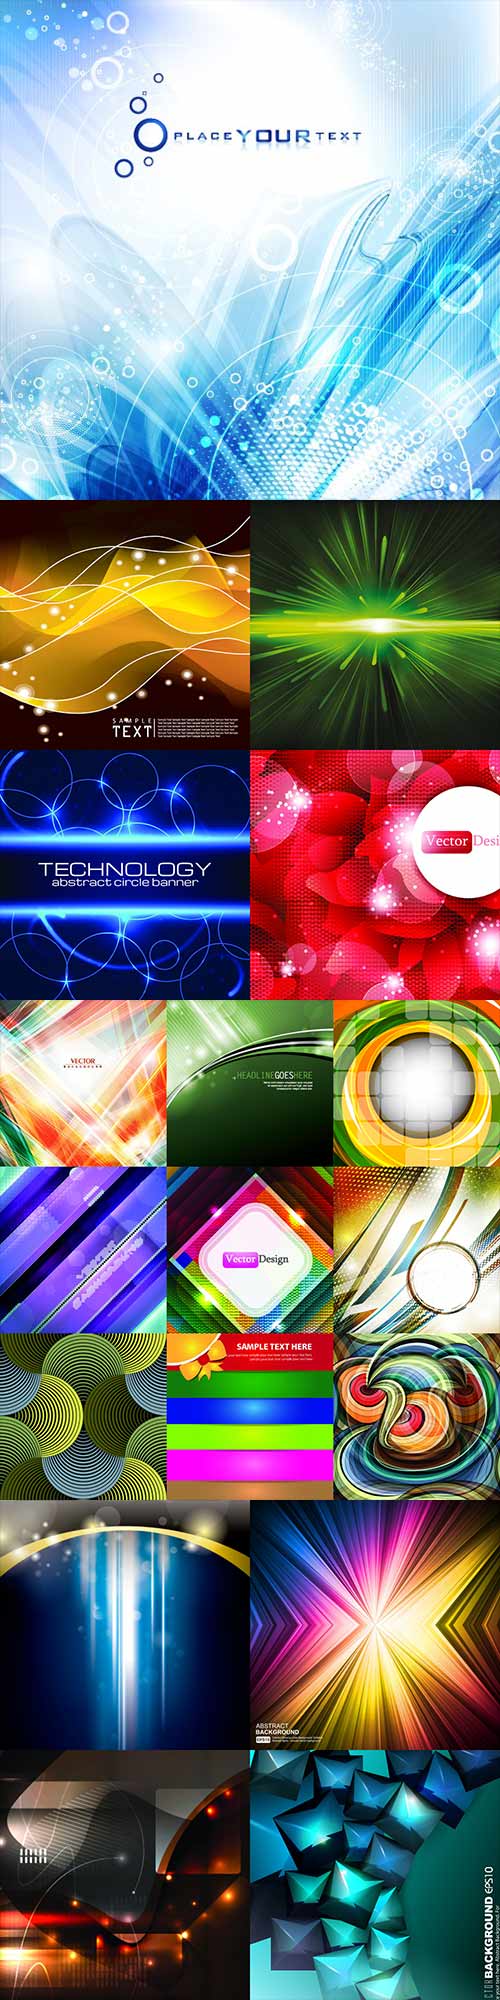 Bright colorful abstract backgrounds vector - 78